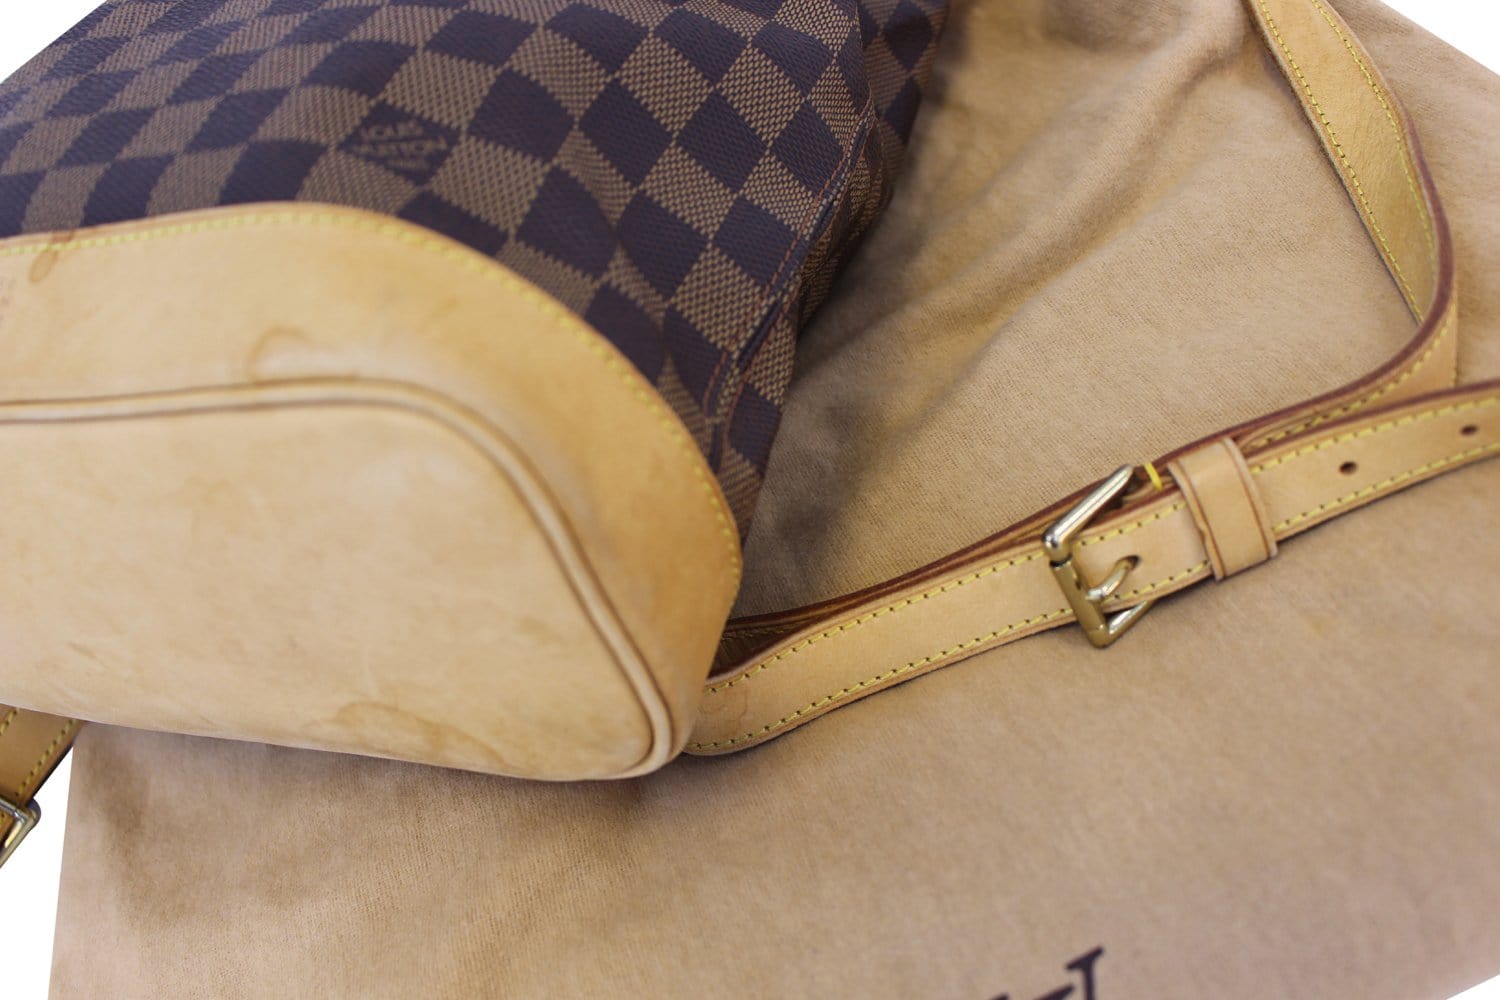 Louis Vuitton Backpack Limited Edition Damier Ebene Canvas